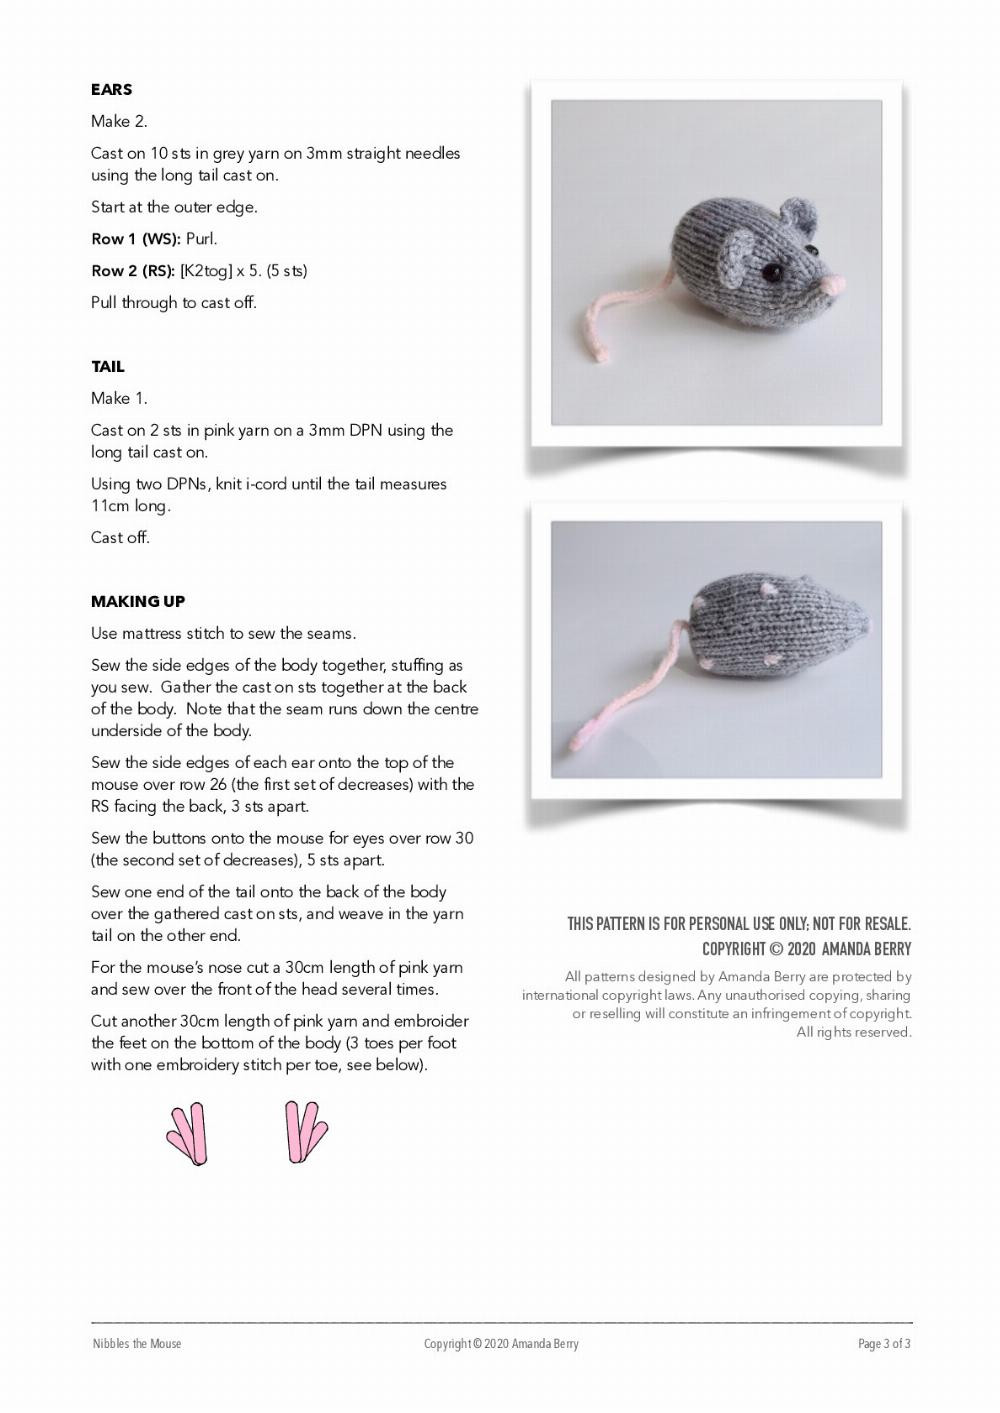 * Nibbles the Mouse * Knitting Pattern